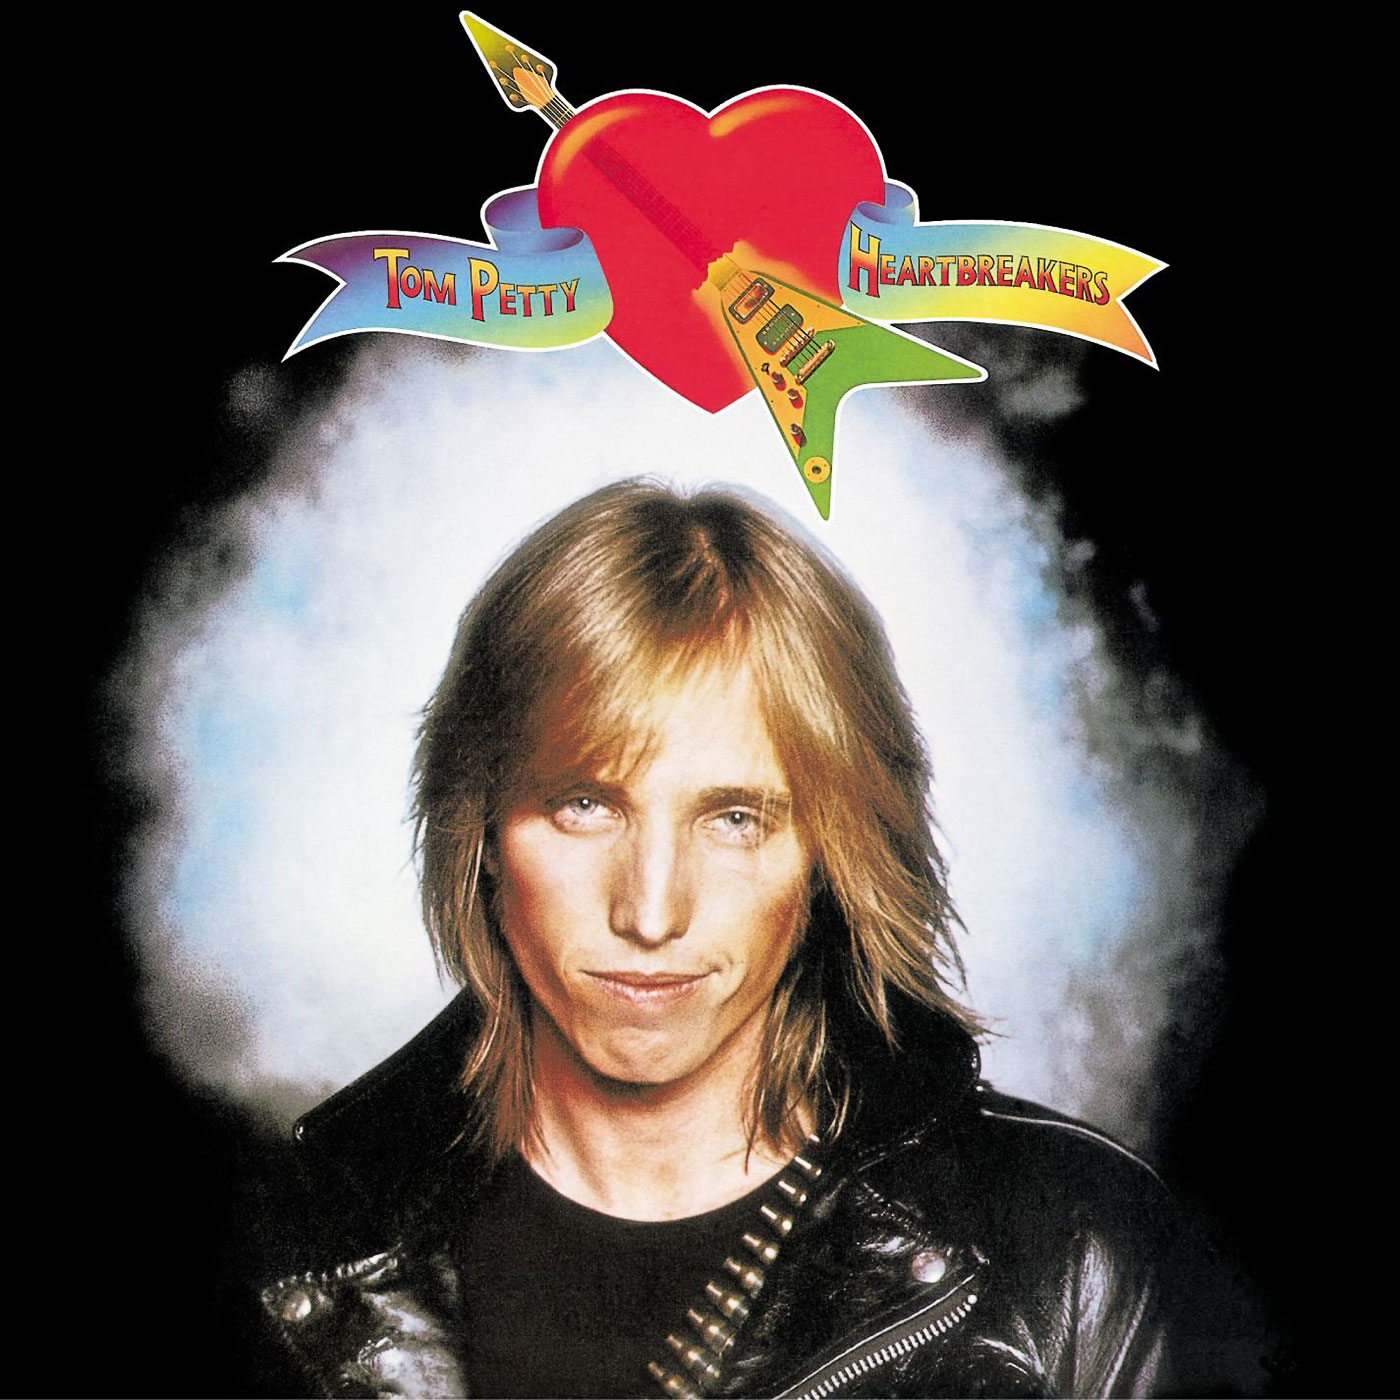 349 Tom Petty – Tom Petty and the Heartbreakers